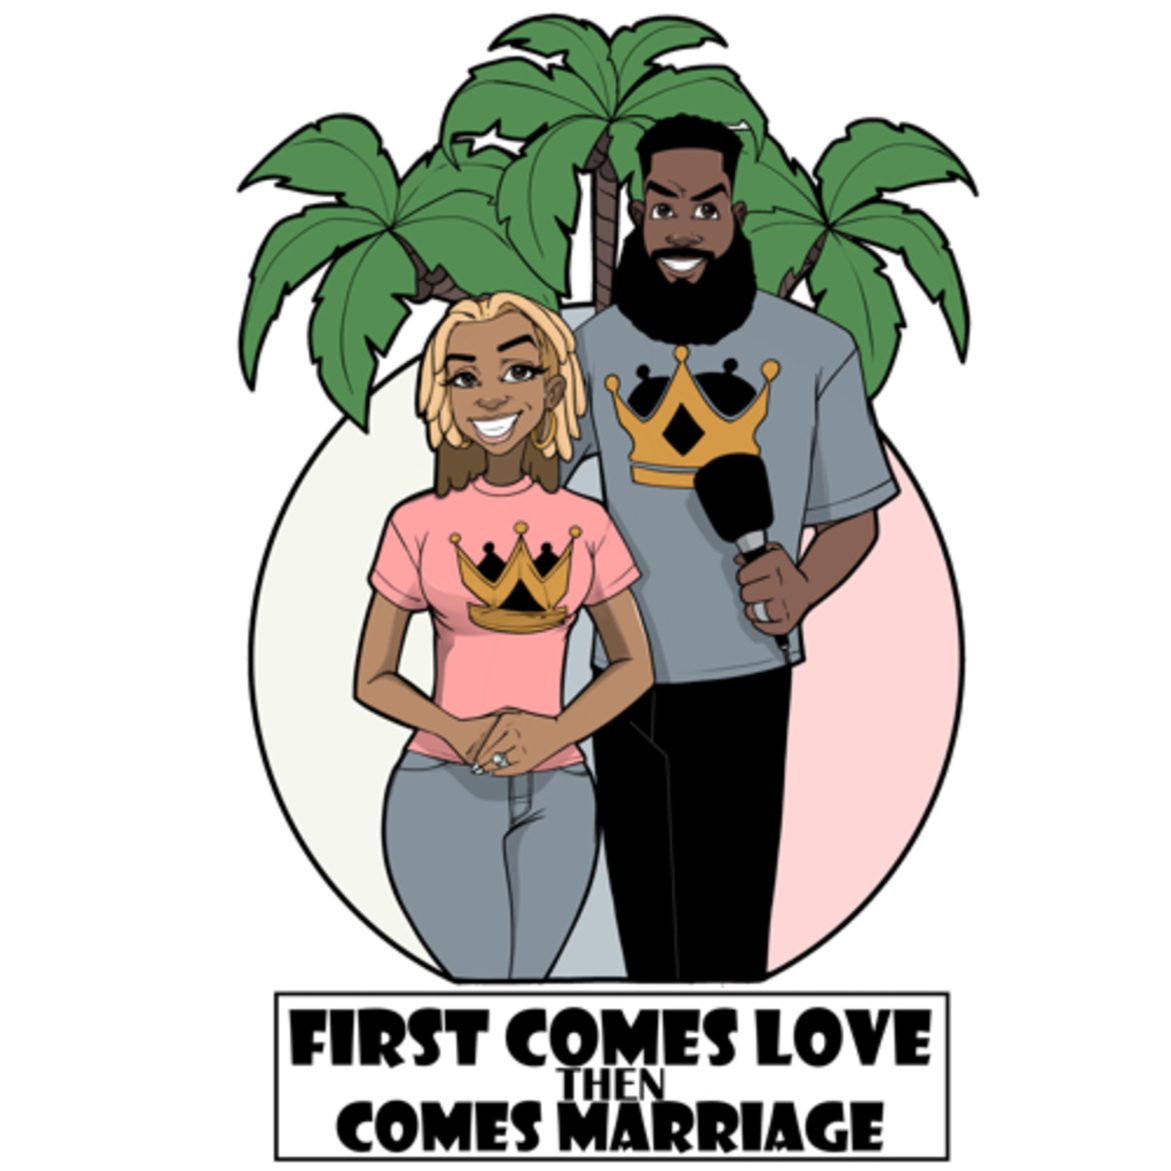 Black Podcasting - "Love Knows No Bounds" - Unleashing the Infinite Power of Love | First Comes Love, Then Comes Marriage S5E14